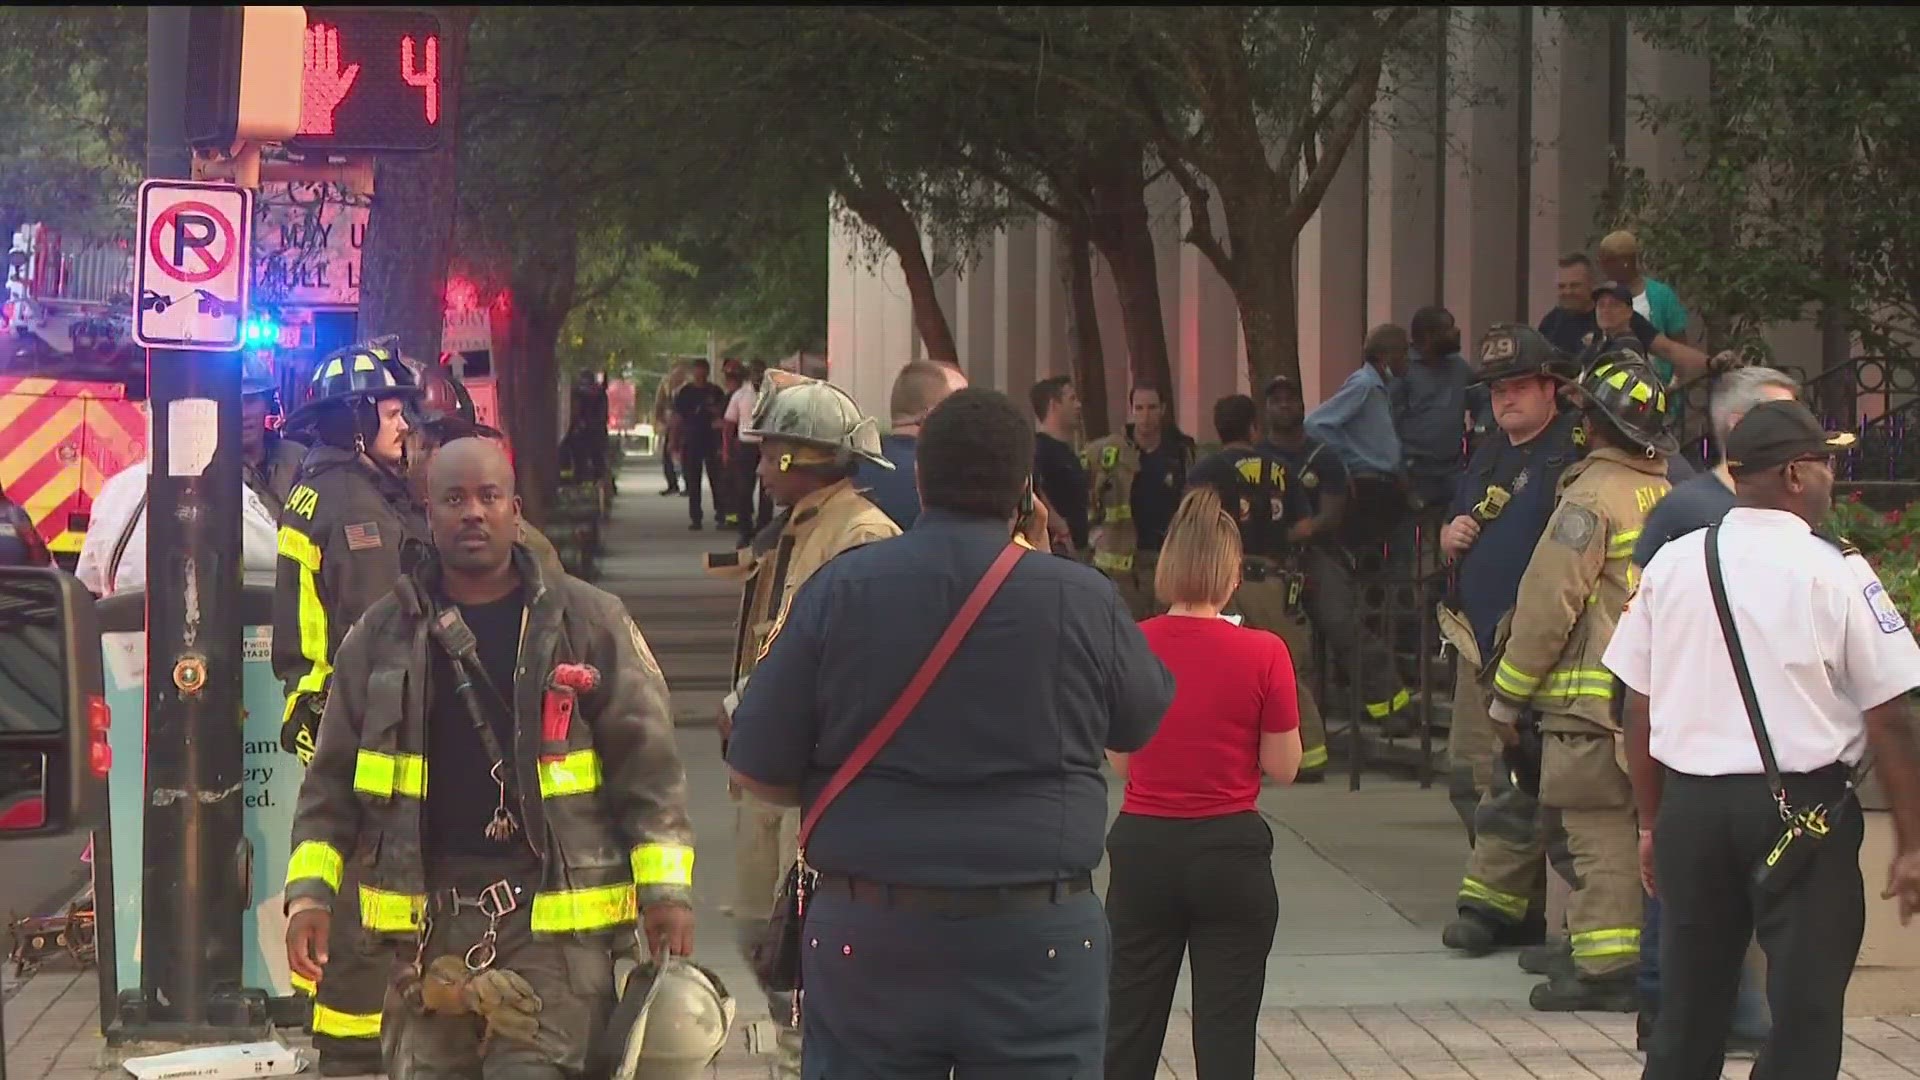 Firefighters believe faulty wires in the elevator's control panel sparked the fire.